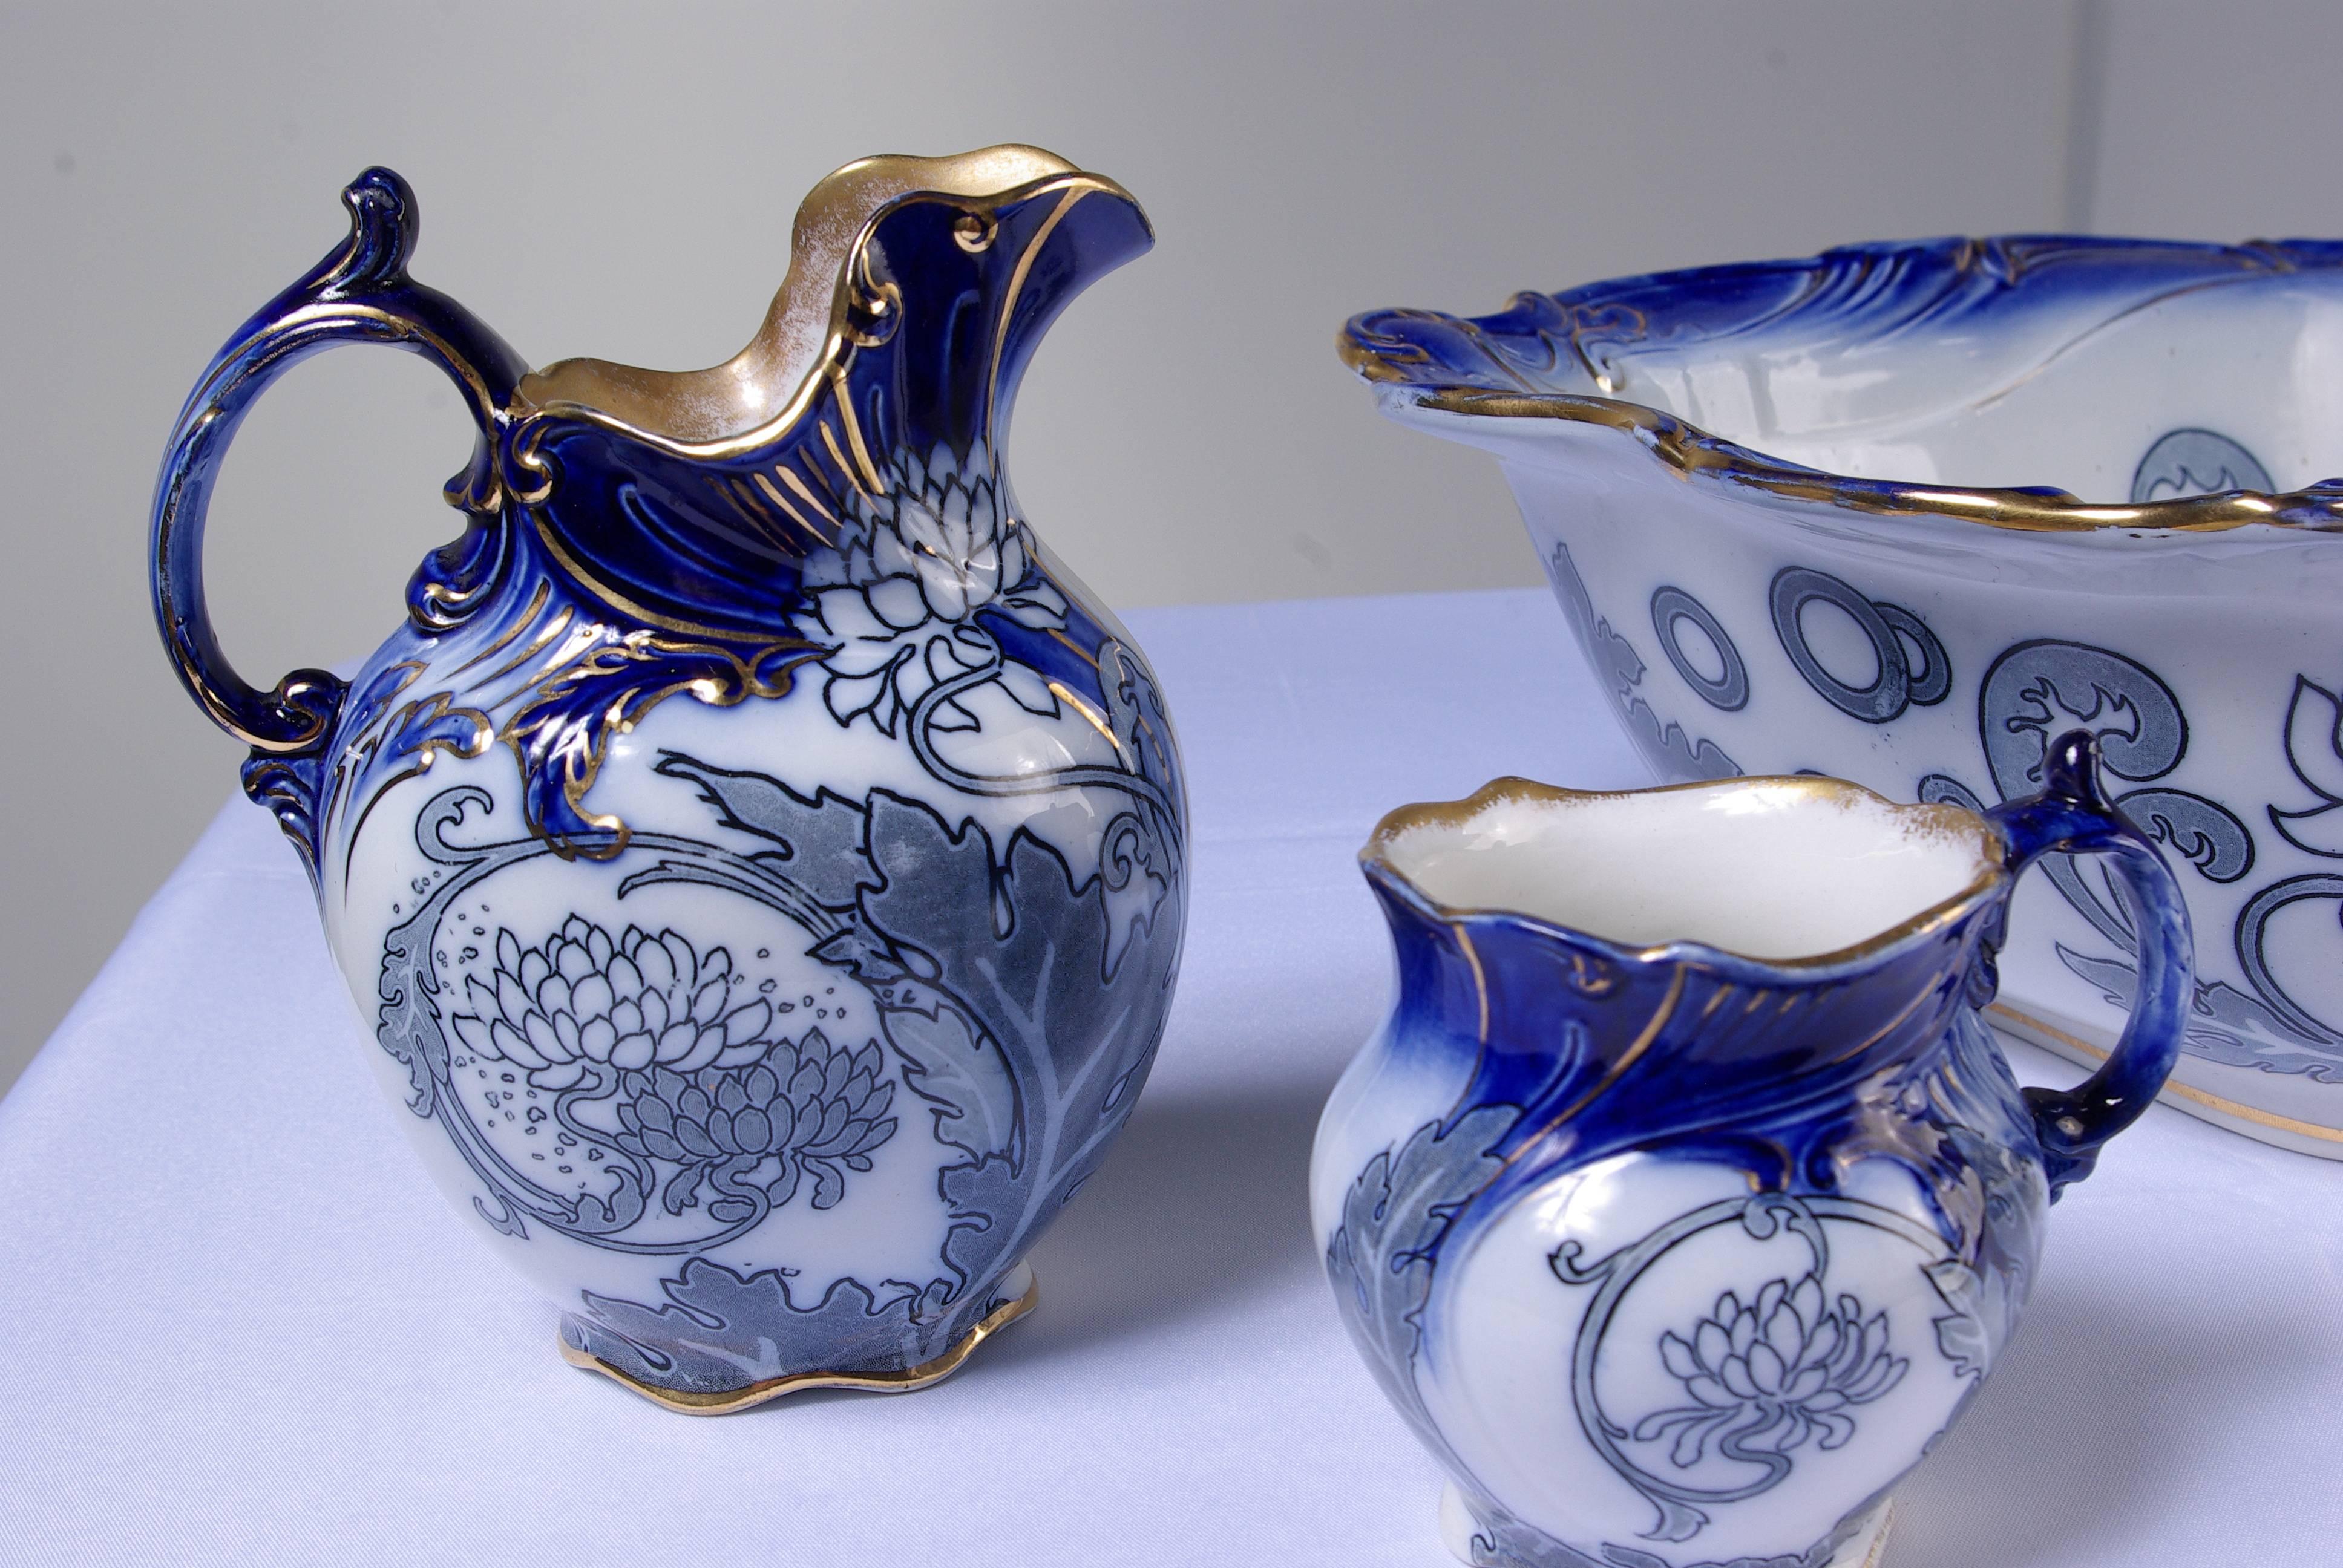 
Our item B362 is a set of four antique Royal Doulton pieces featuring, in floral blue, a pitcher, a wash basin, jug and mug. Each piece is of wonderful quality and condition with no chips, cracks or repairs. It is rare to locate a set of such